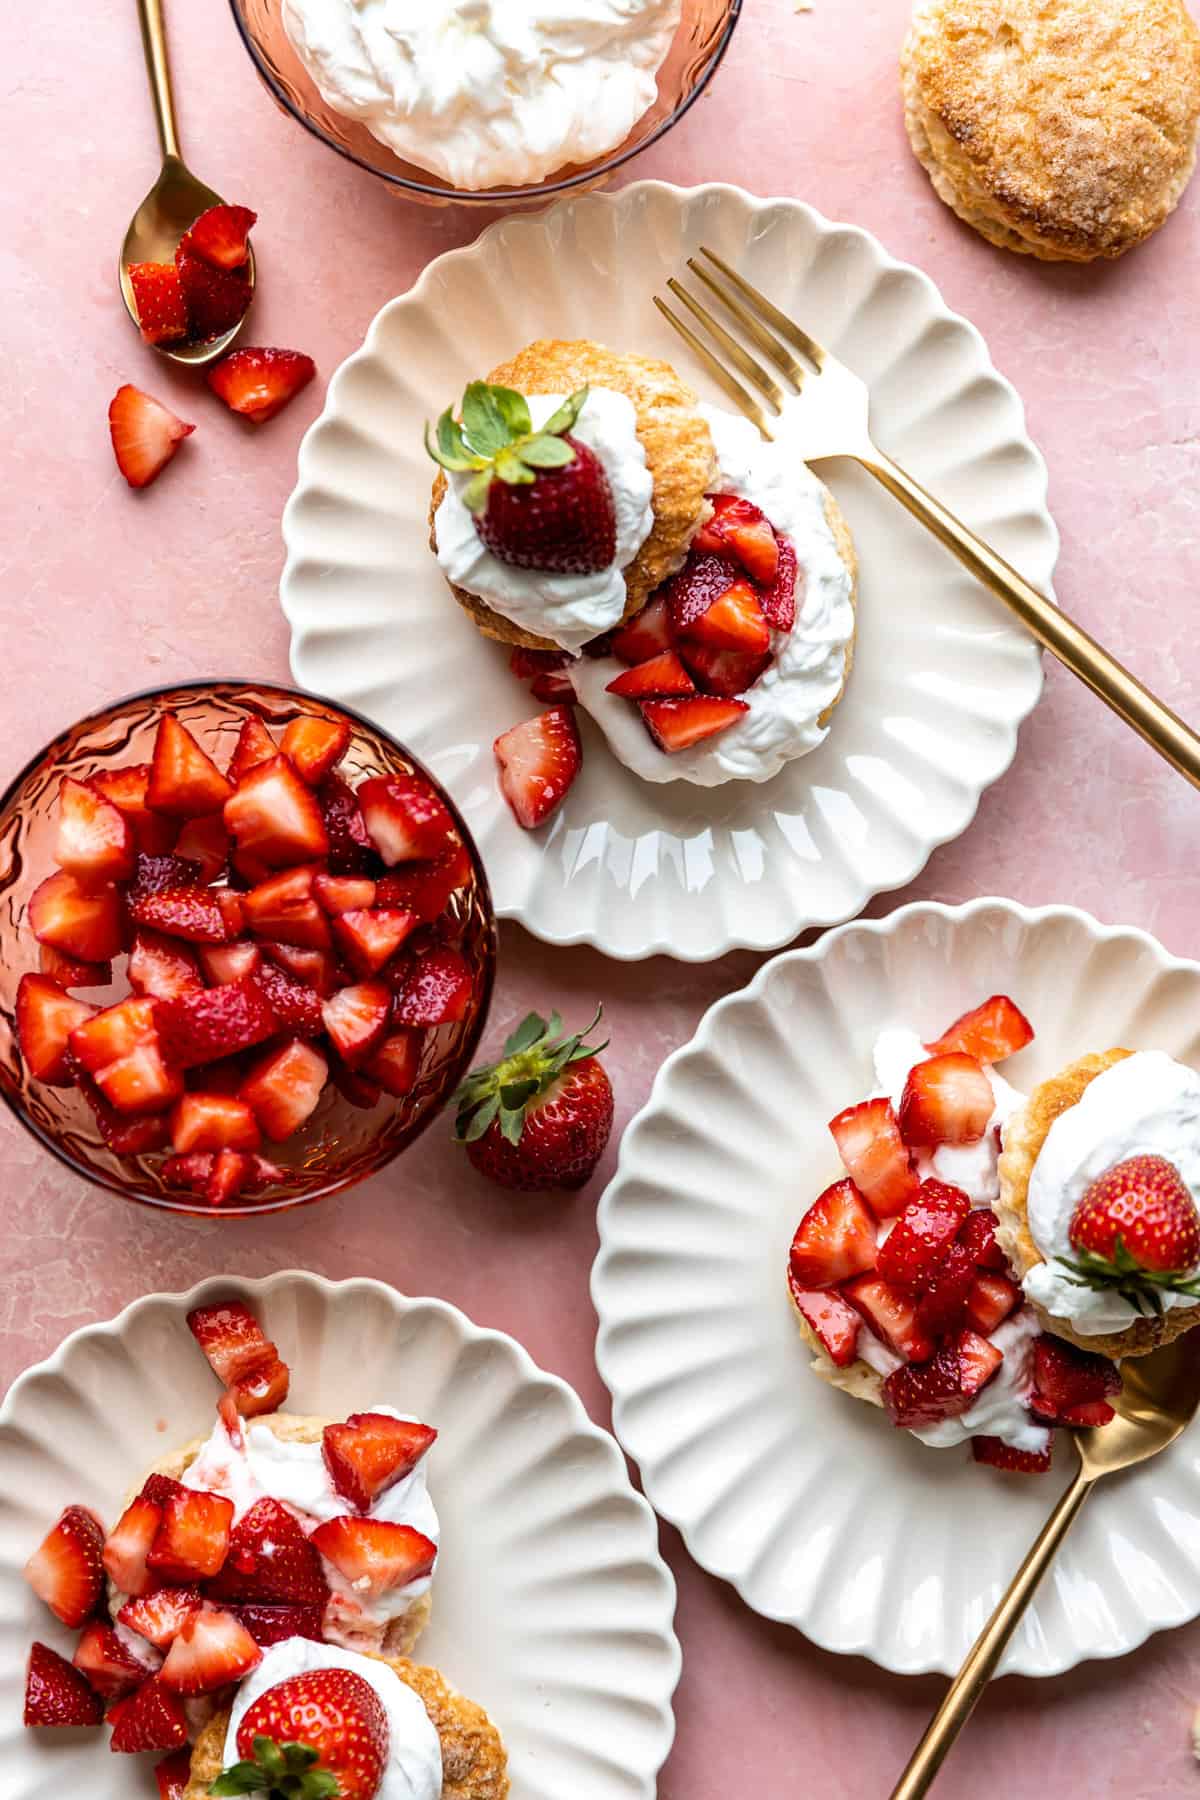 Overhead shot of plates of strawberry shortcake served with a bowl of sliced strawberries and a bowl of whipped cream.